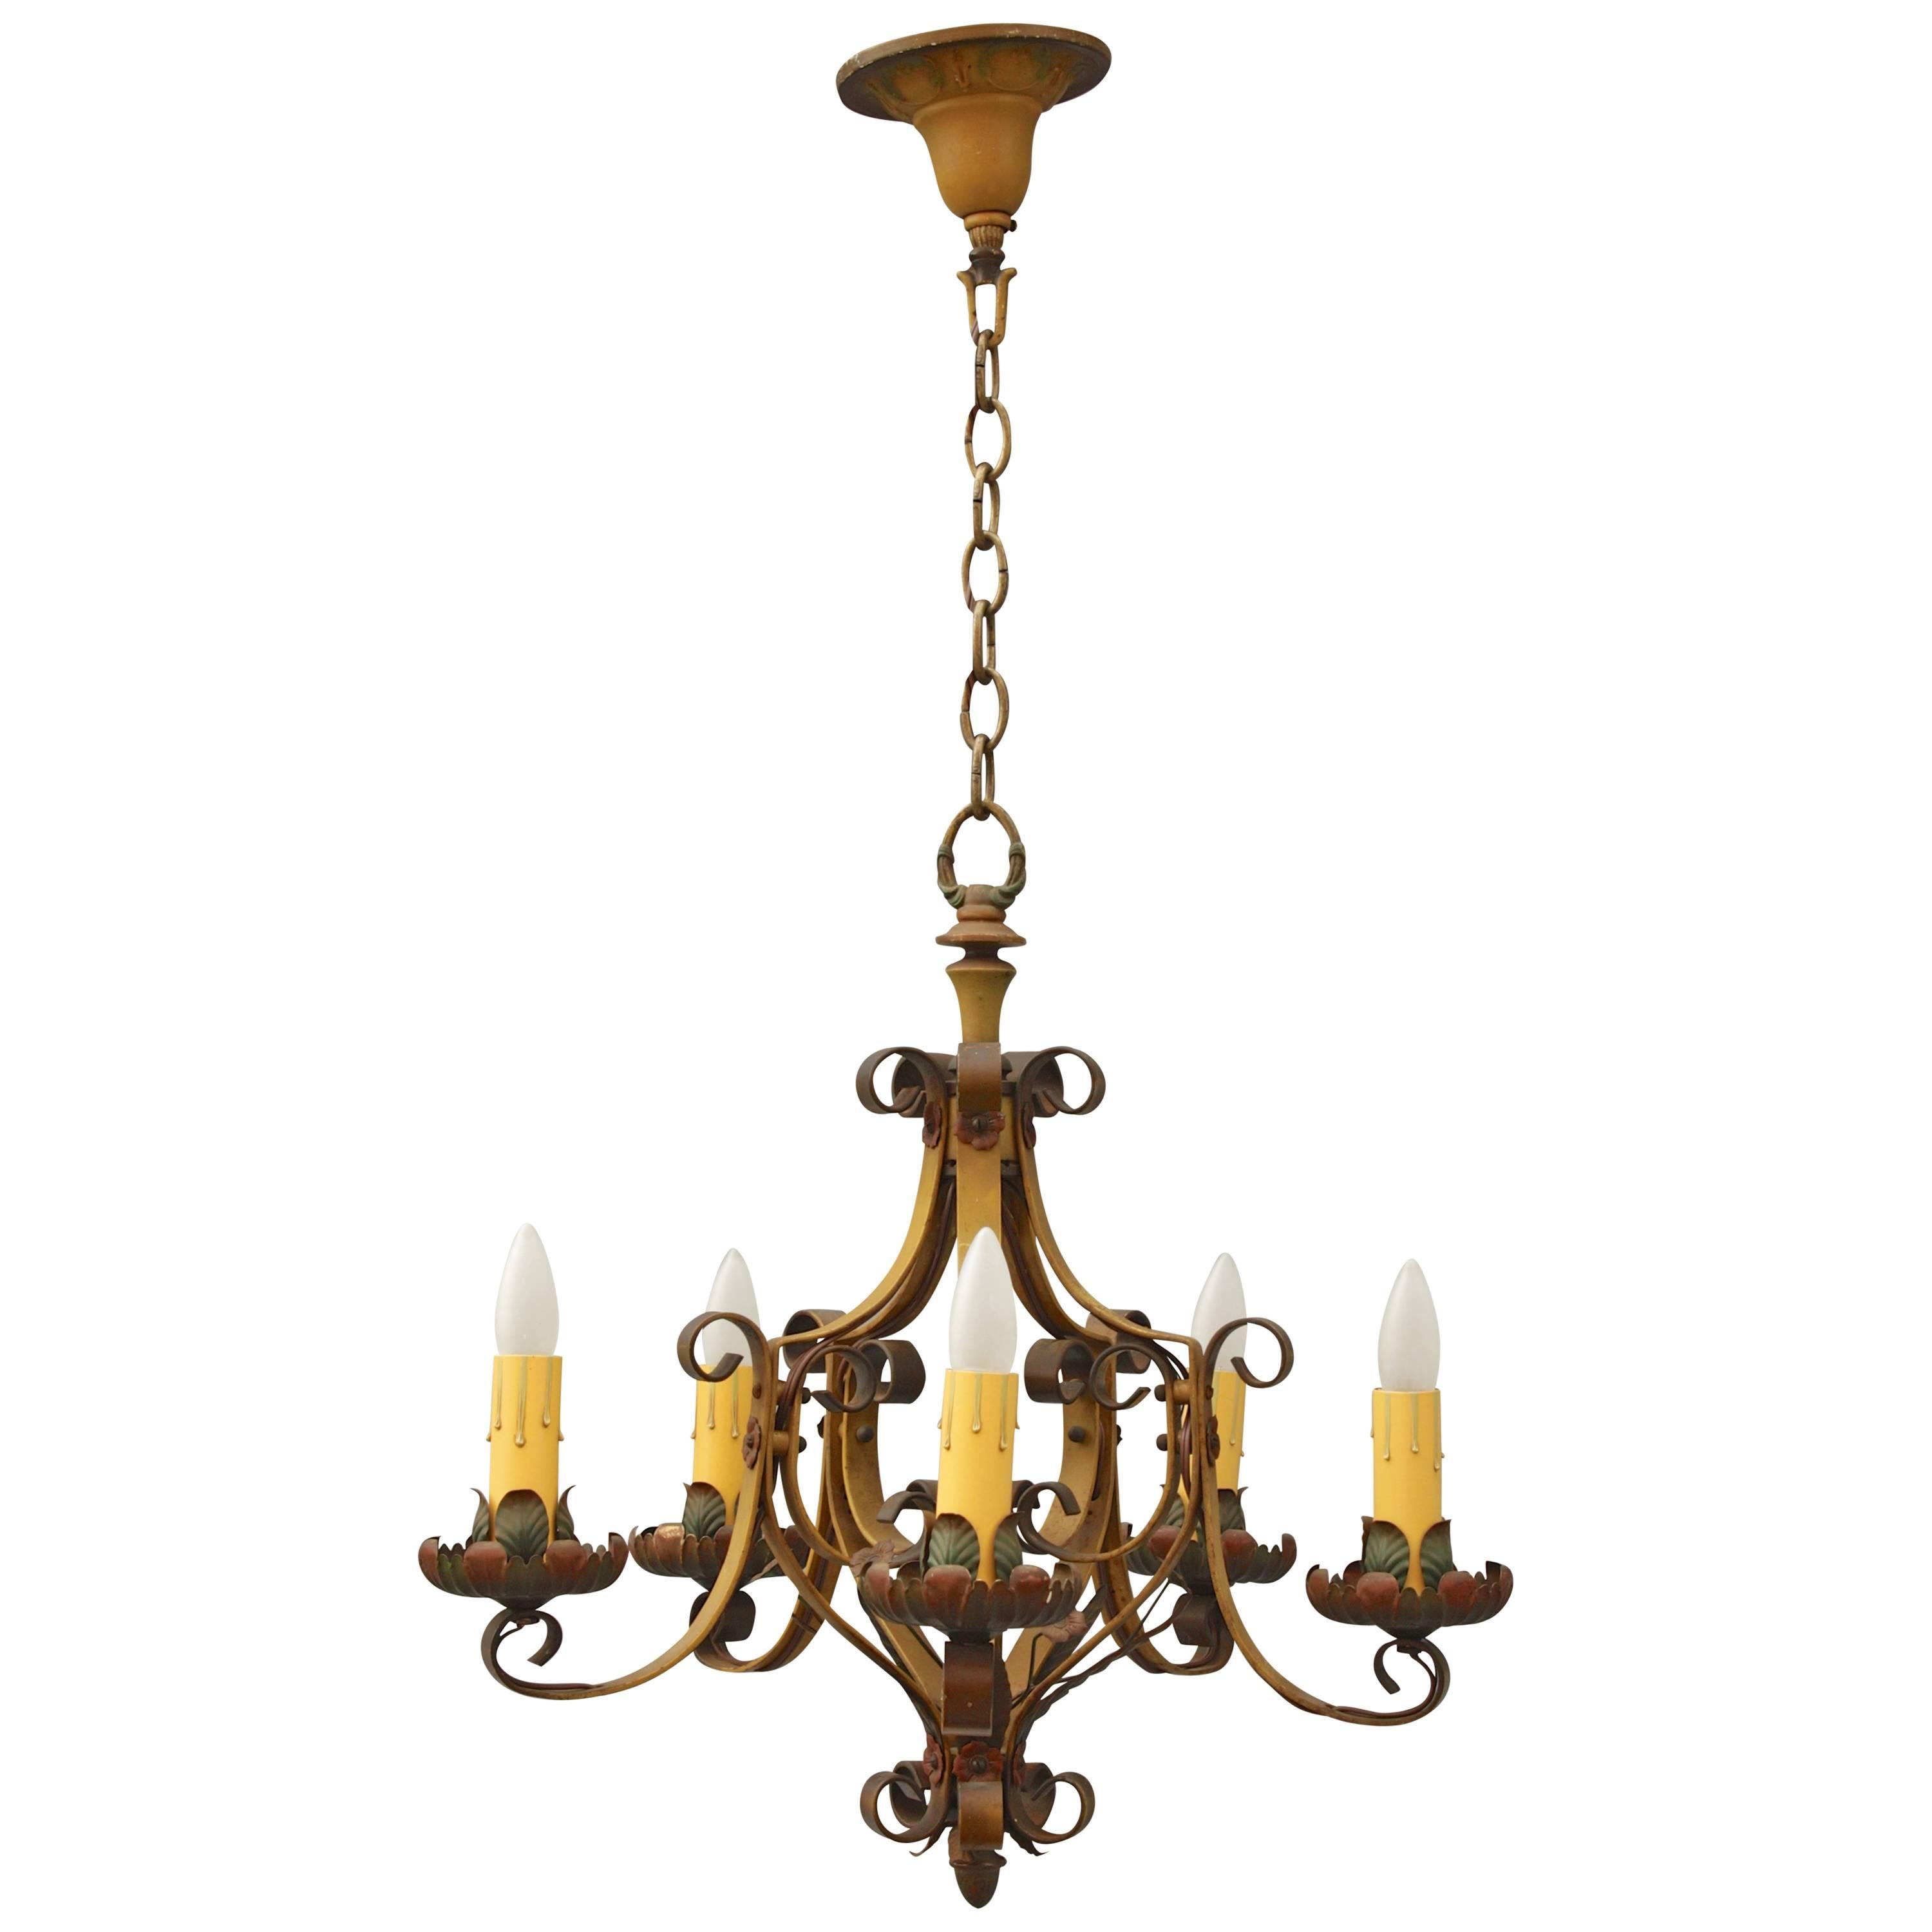 1920s Polychrome Spanish Revival Chandelier For Sale